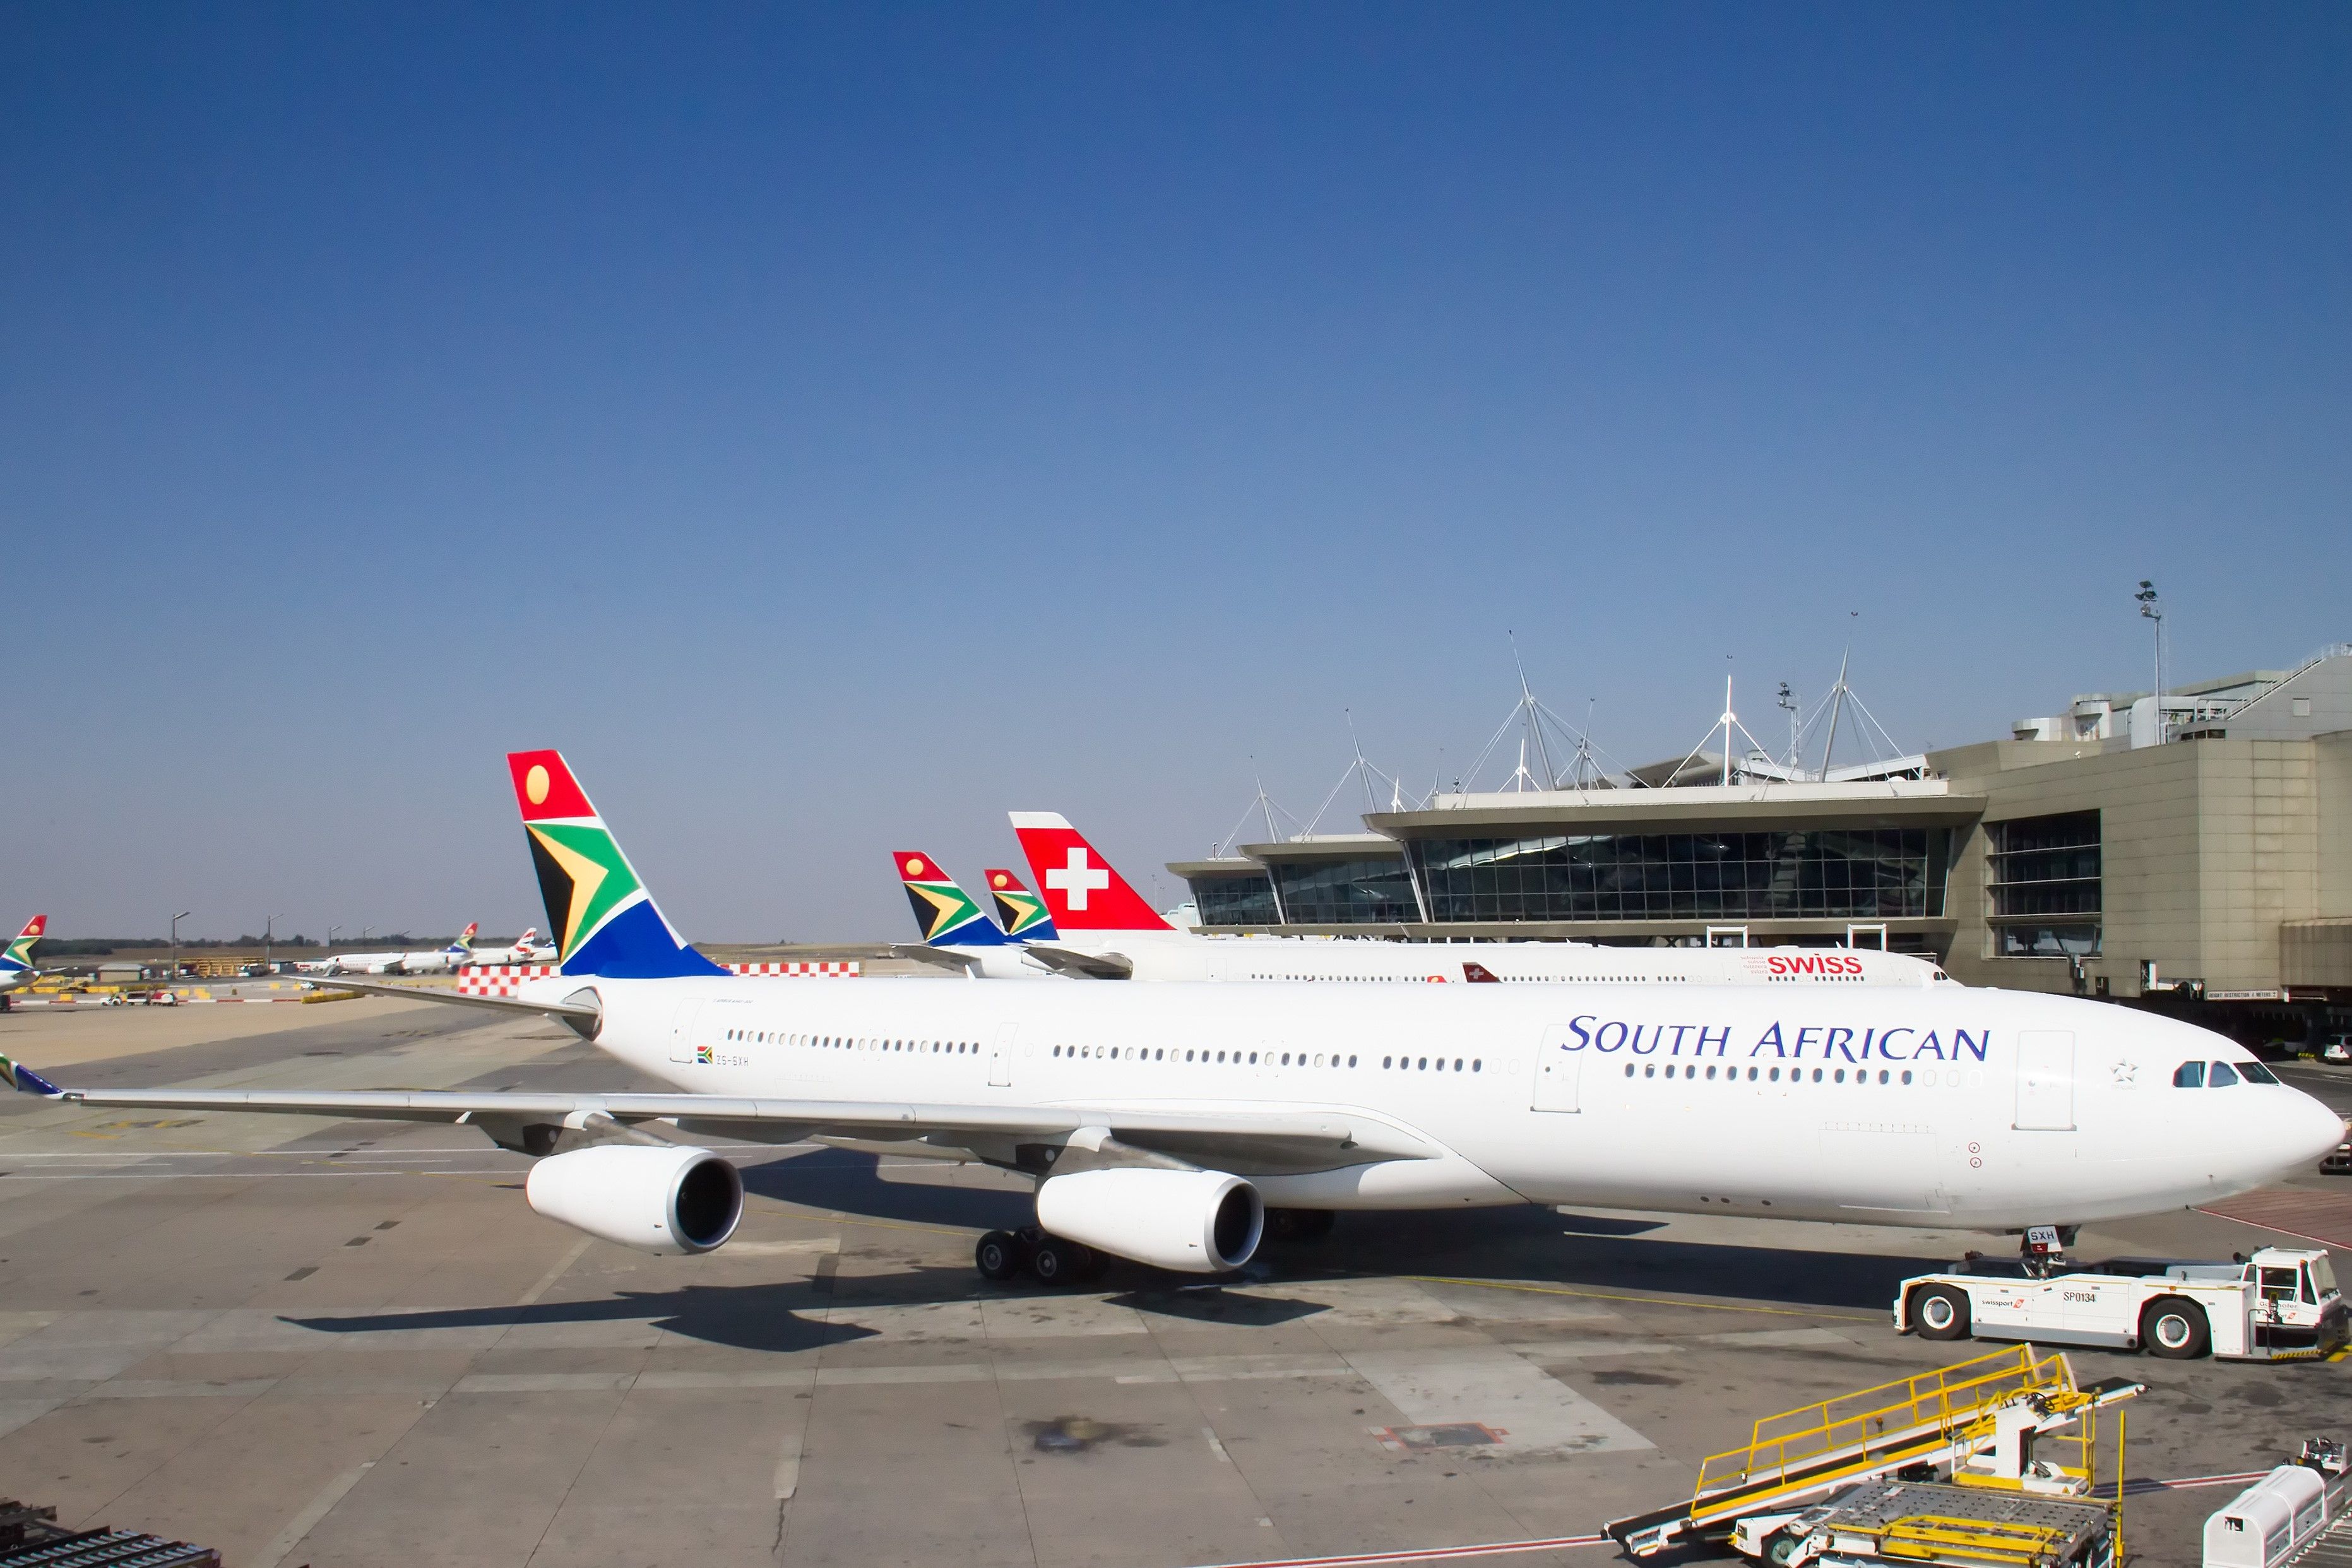 A South African Airways aircraft parked near a SWISS aircraft on an airport apron.